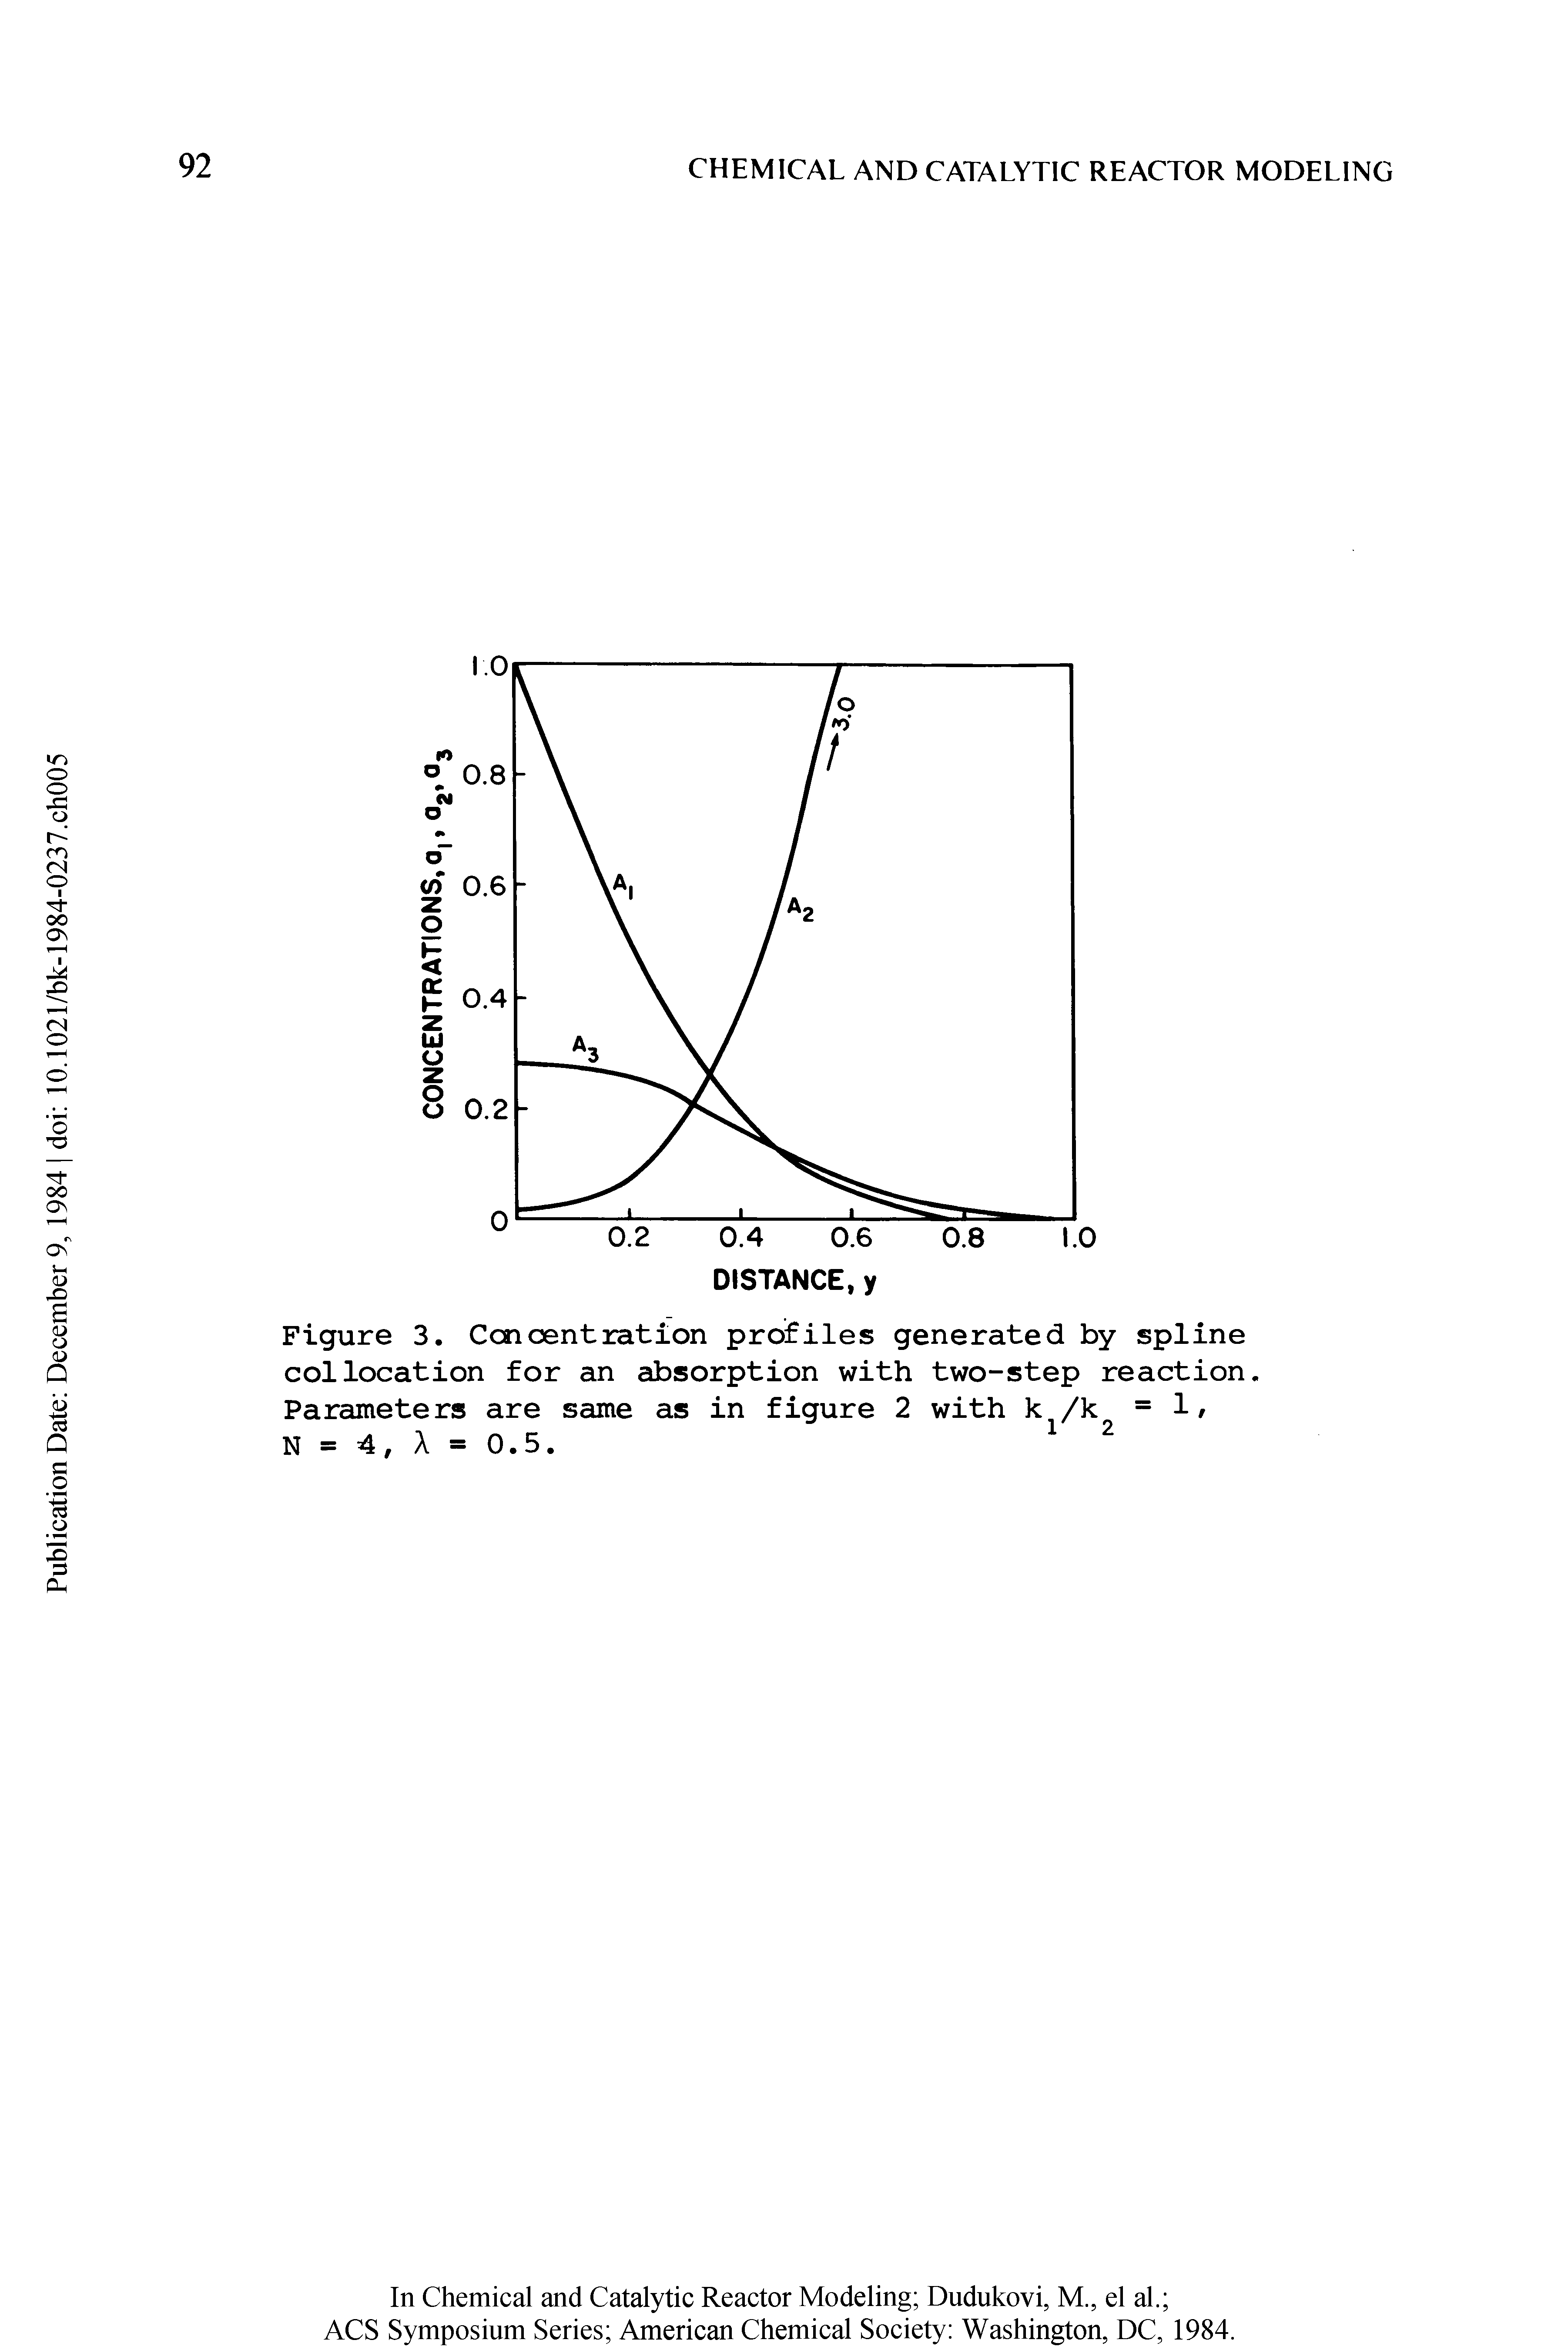 Figure 3. Concentration profiles generated by spline collocation for an absorption with two-step reaction. Parameters are same as in figure 2 with k /k =1/...